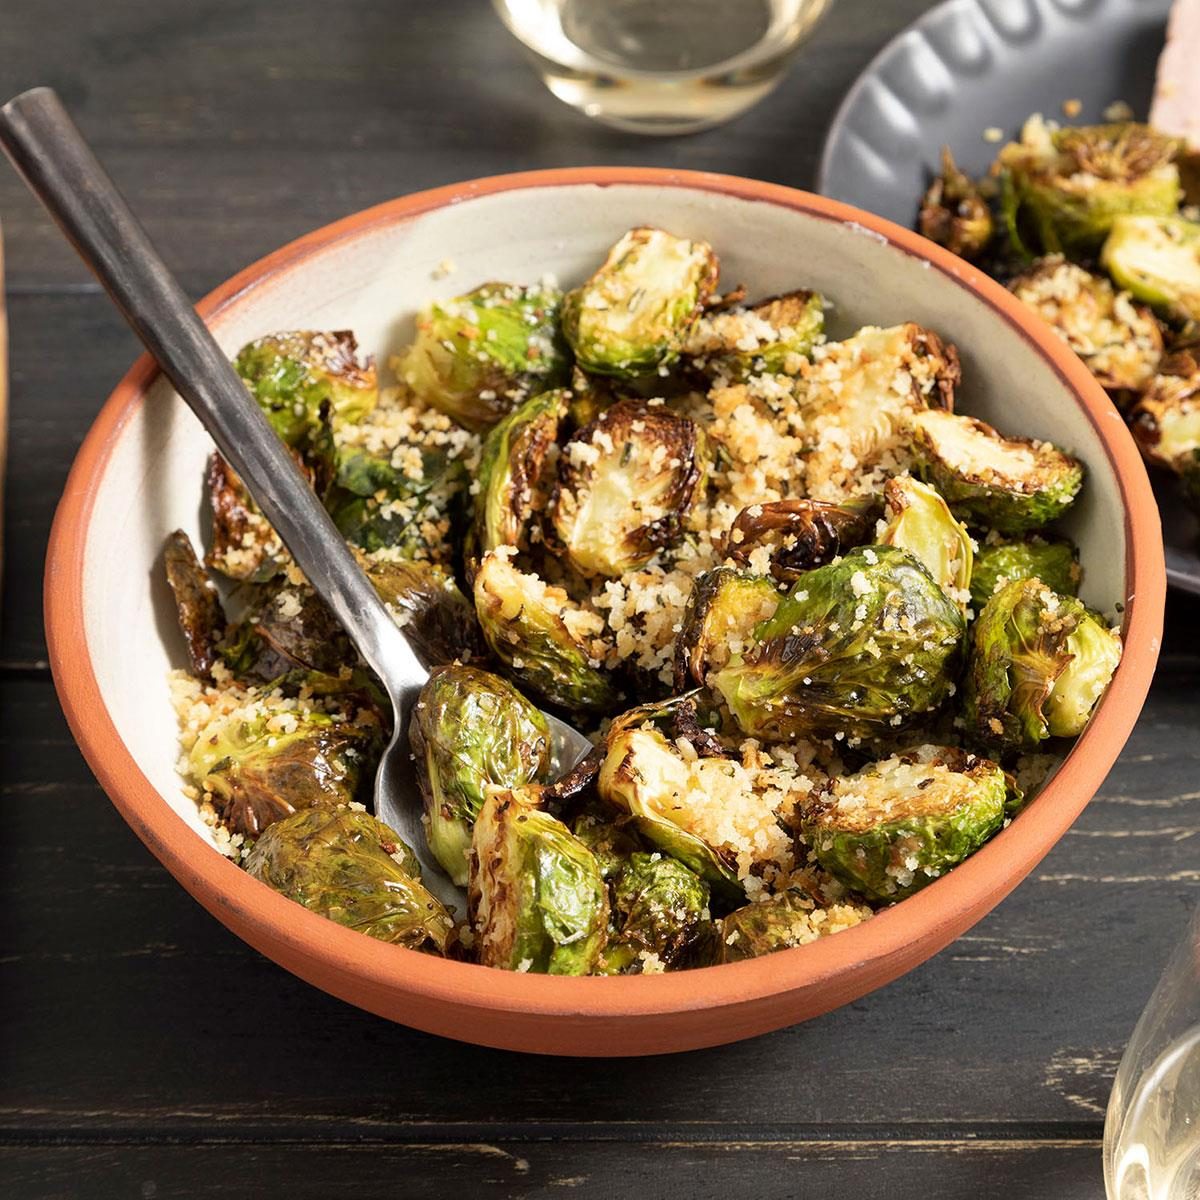 https://www.tasteofhome.com/wp-content/uploads/2018/05/Air-Fryer-Garlic-Rosemary-Brussels-Sprouts_EXPS_FT23_227185_ST_0921_2.jpg